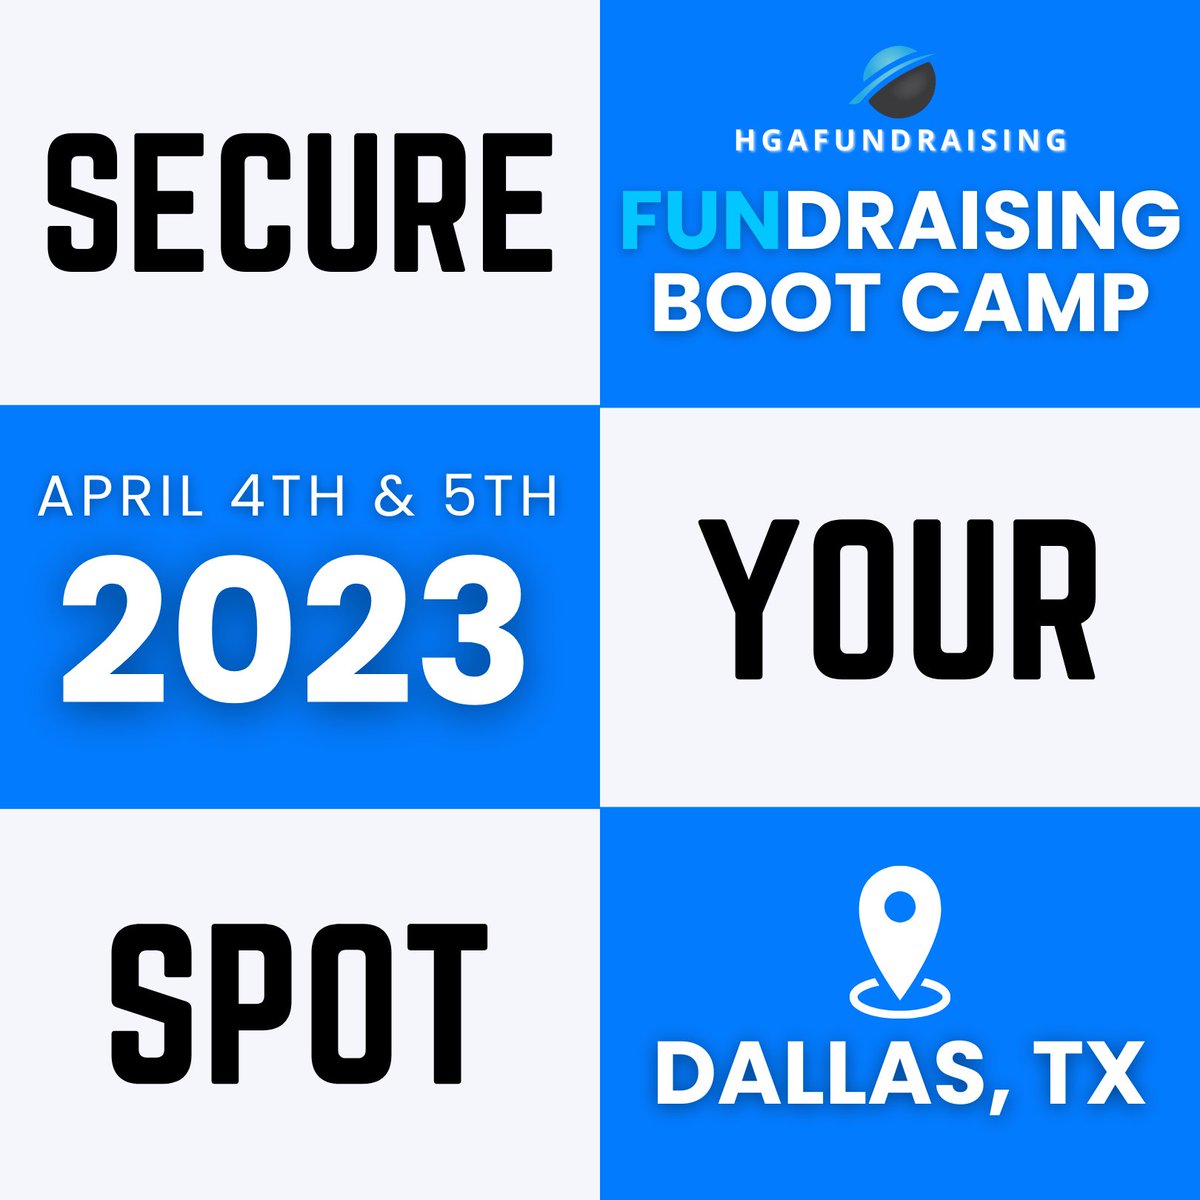 See you in Dallas on April 4th and 5th. Secure your spot below before it's too late. 

pages.insightly.services/hgafundraising…

#fundraising #learning #nonprofitleader #bootcamp #dallas #raisemoremoney #thehgaway